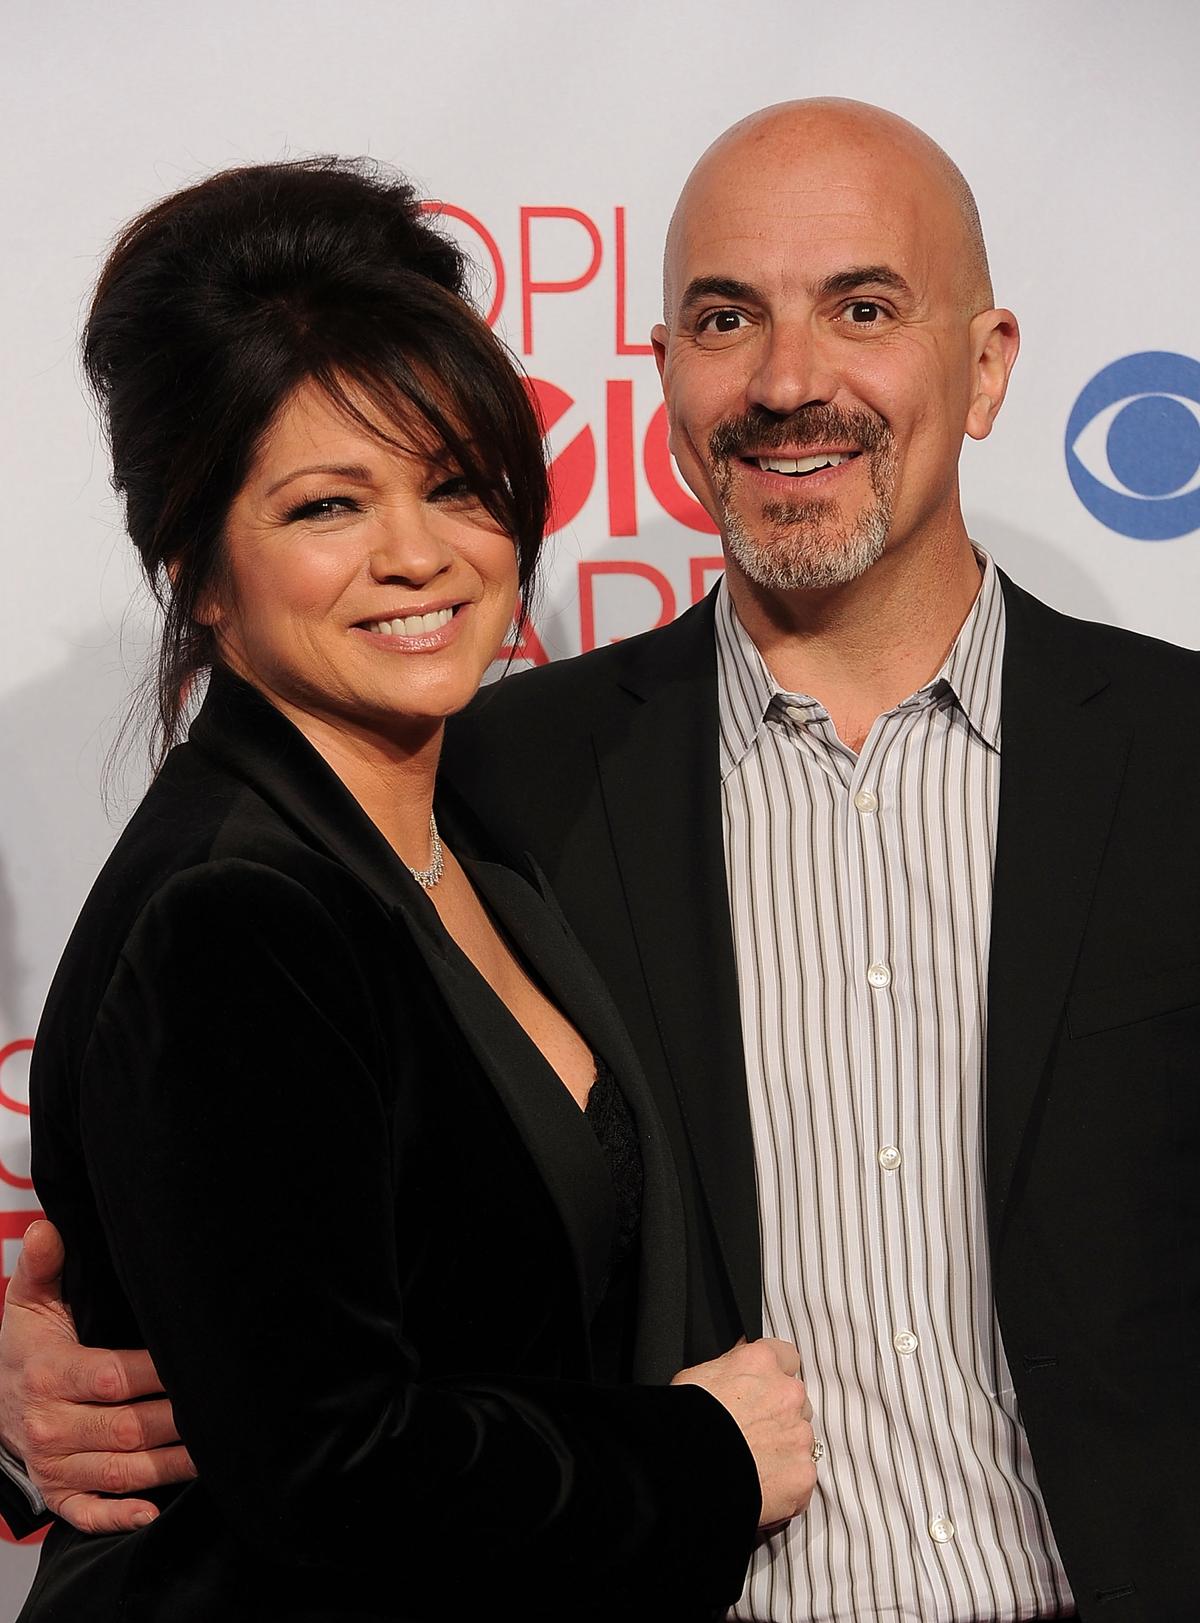 Actress Valerie Bertinelli with her husband, Tom Vitale, at the People's Choice Awards at Nokia Theatre in Los Angeles, California, on Jan. 11, 2012 (©Getty Images | <a href="https://www.gettyimages.com/detail/news-photo/actress-valerie-bertinelli-winner-of-favorite-cable-tv-news-photo/136807275?adppopup=true">Jason Merritt</a>)